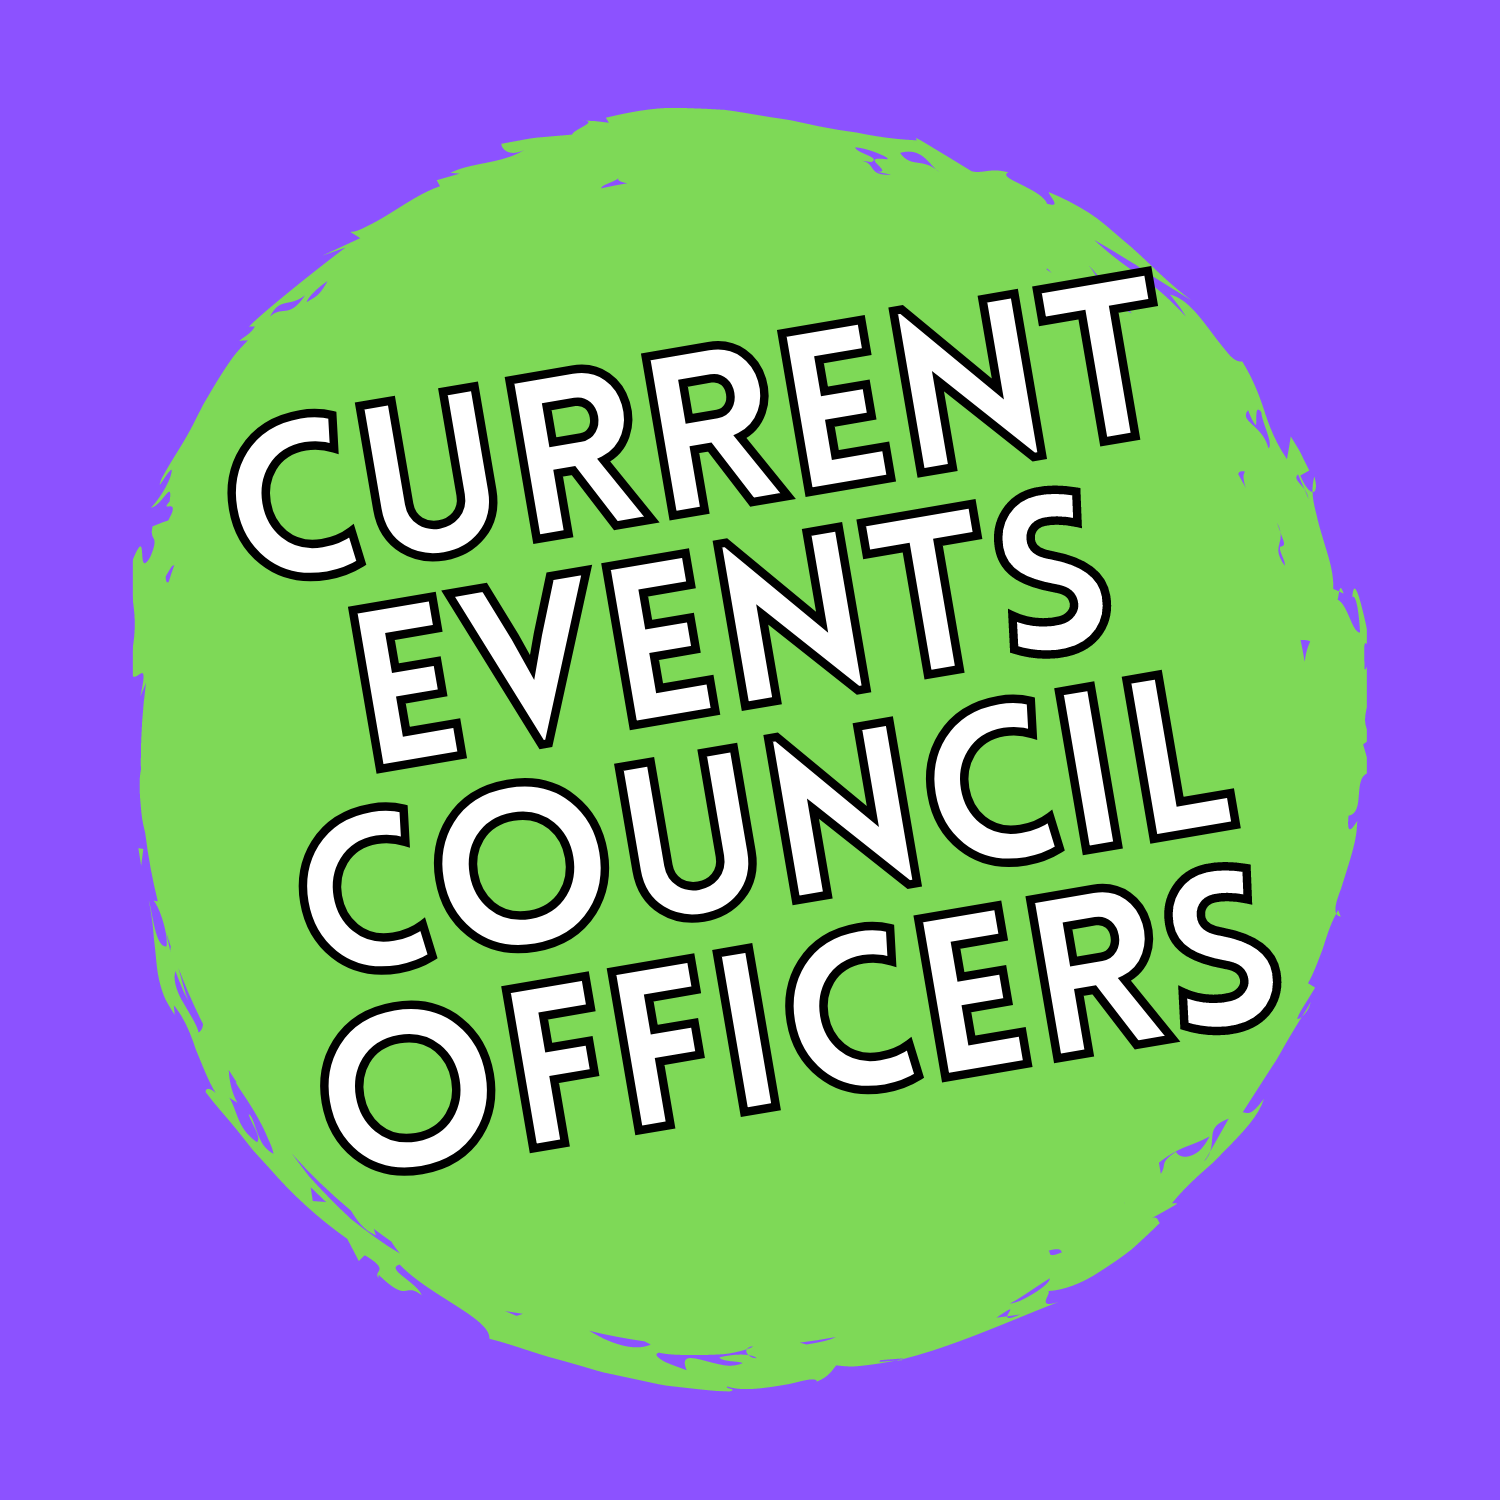 Current Events Council Officers